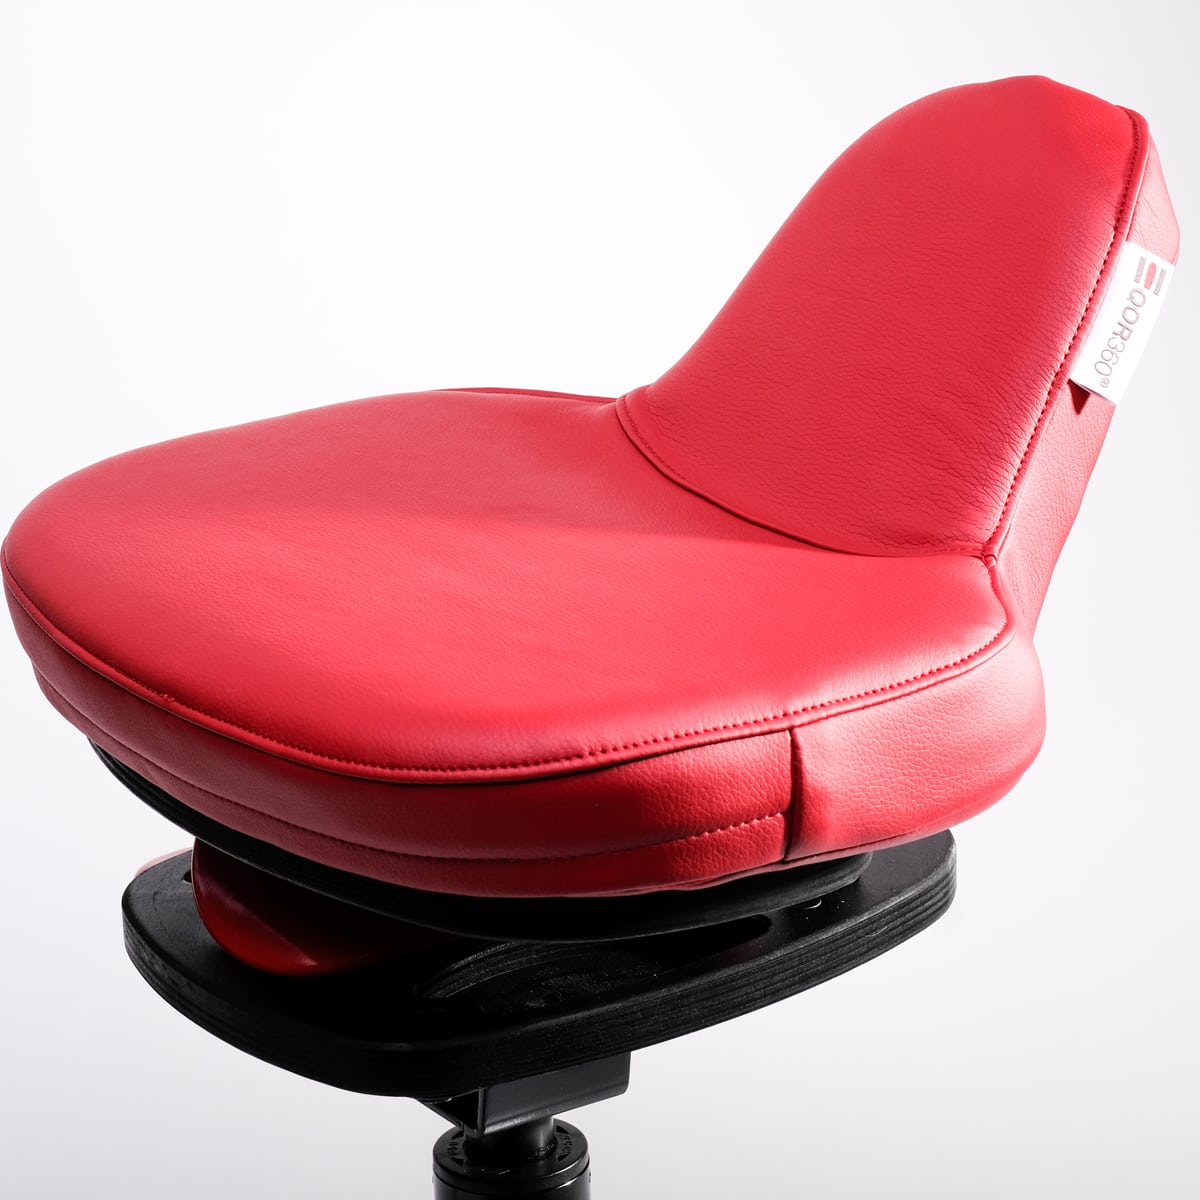 The Ariel 1.0 | Best Office Chair for Upright Posture | QOR360